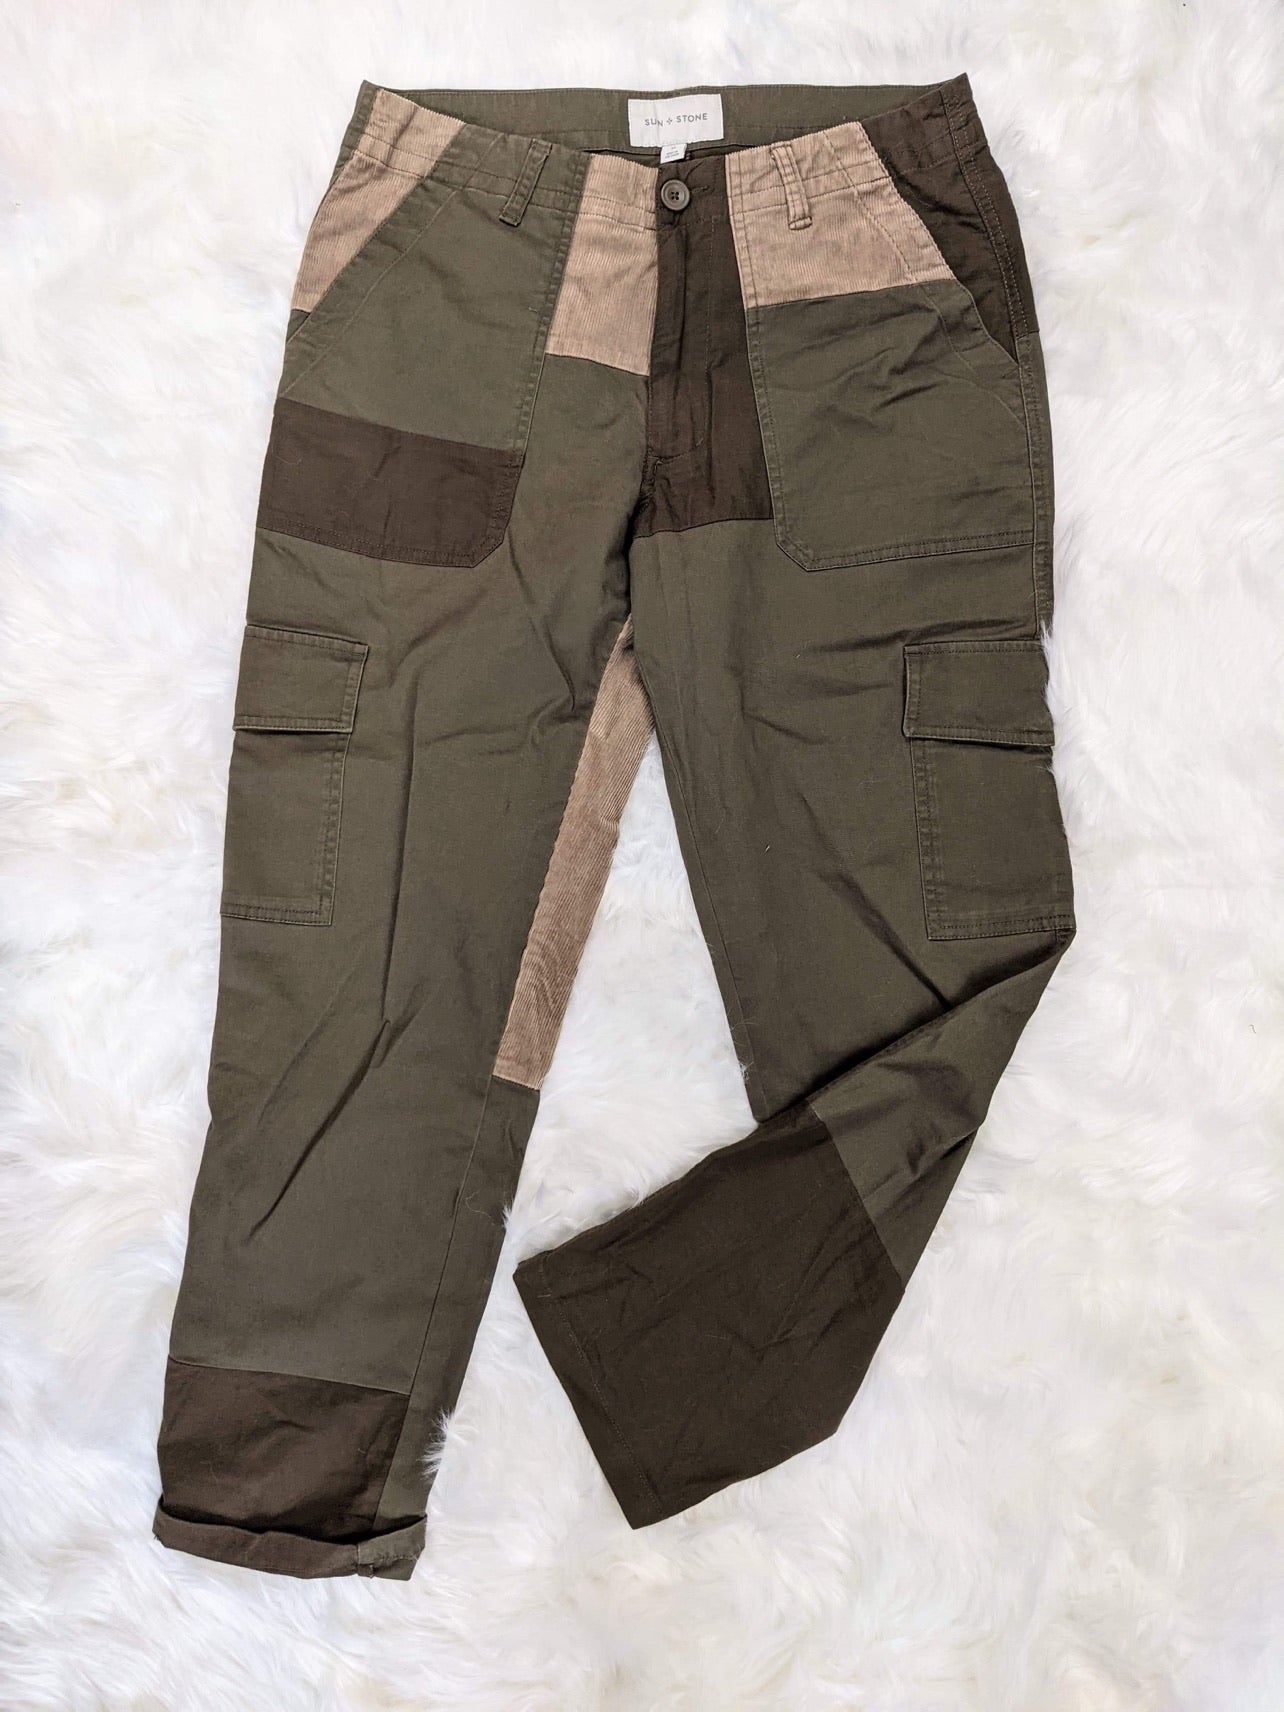 REDHOTYPE Casual Cargo Pants Elastic Outdoor Army Trousers Men Slim Many  Pockets Waterproof Wear Resistant Tactical Pants